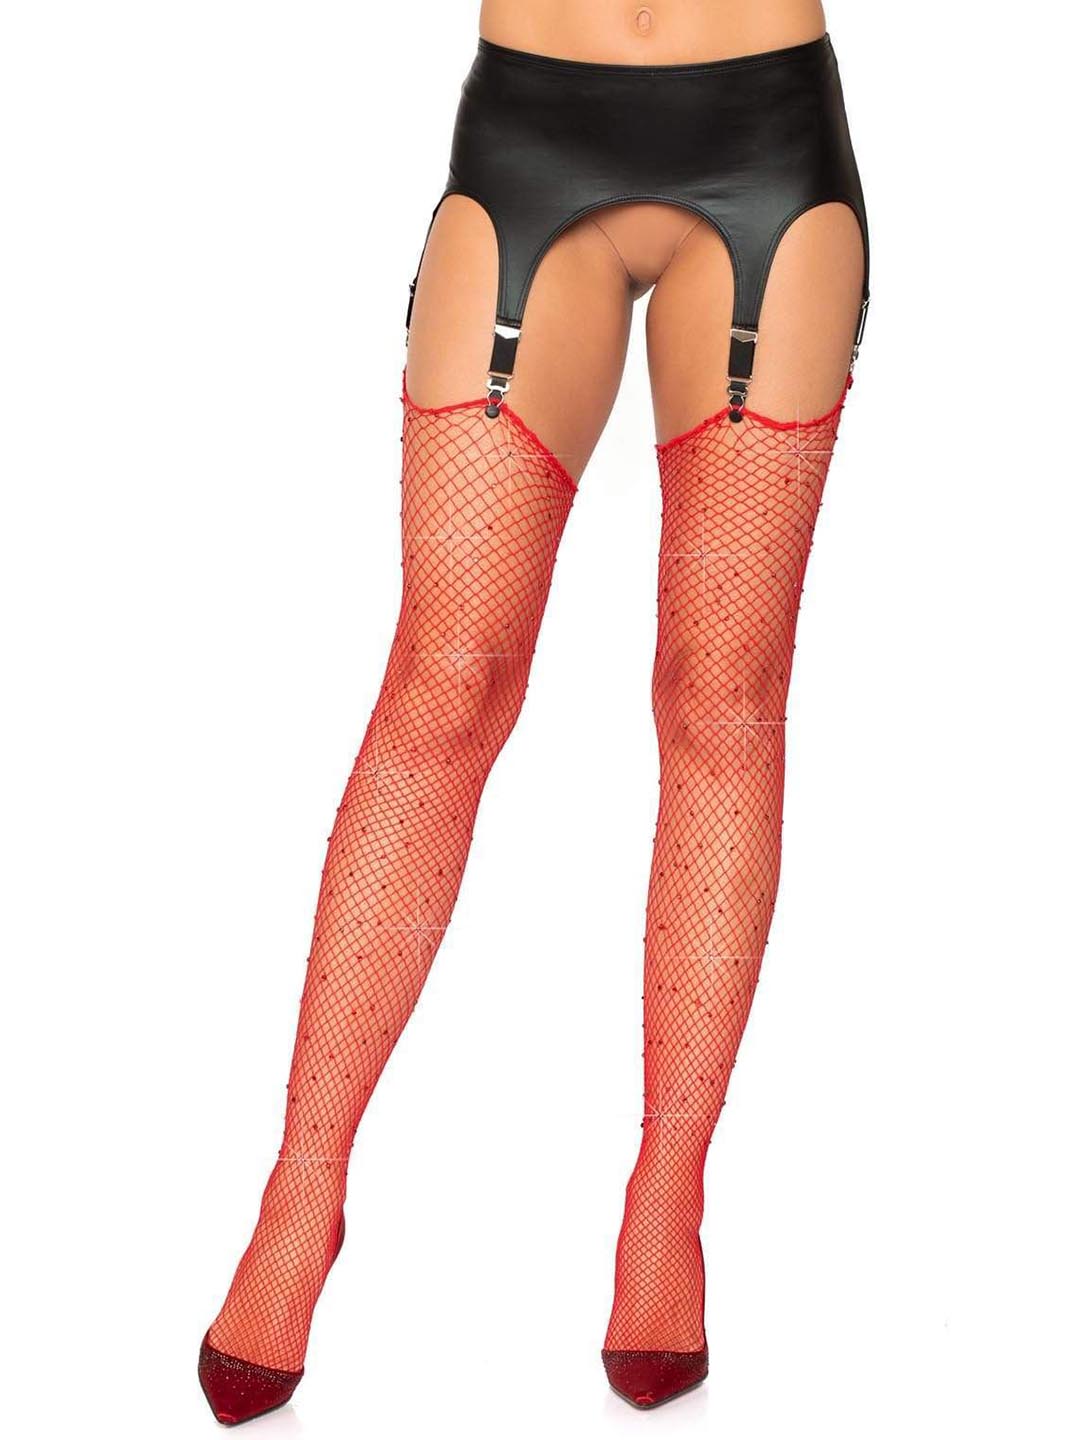 Rhinestone Fishnet Stockings with Unfinished Top